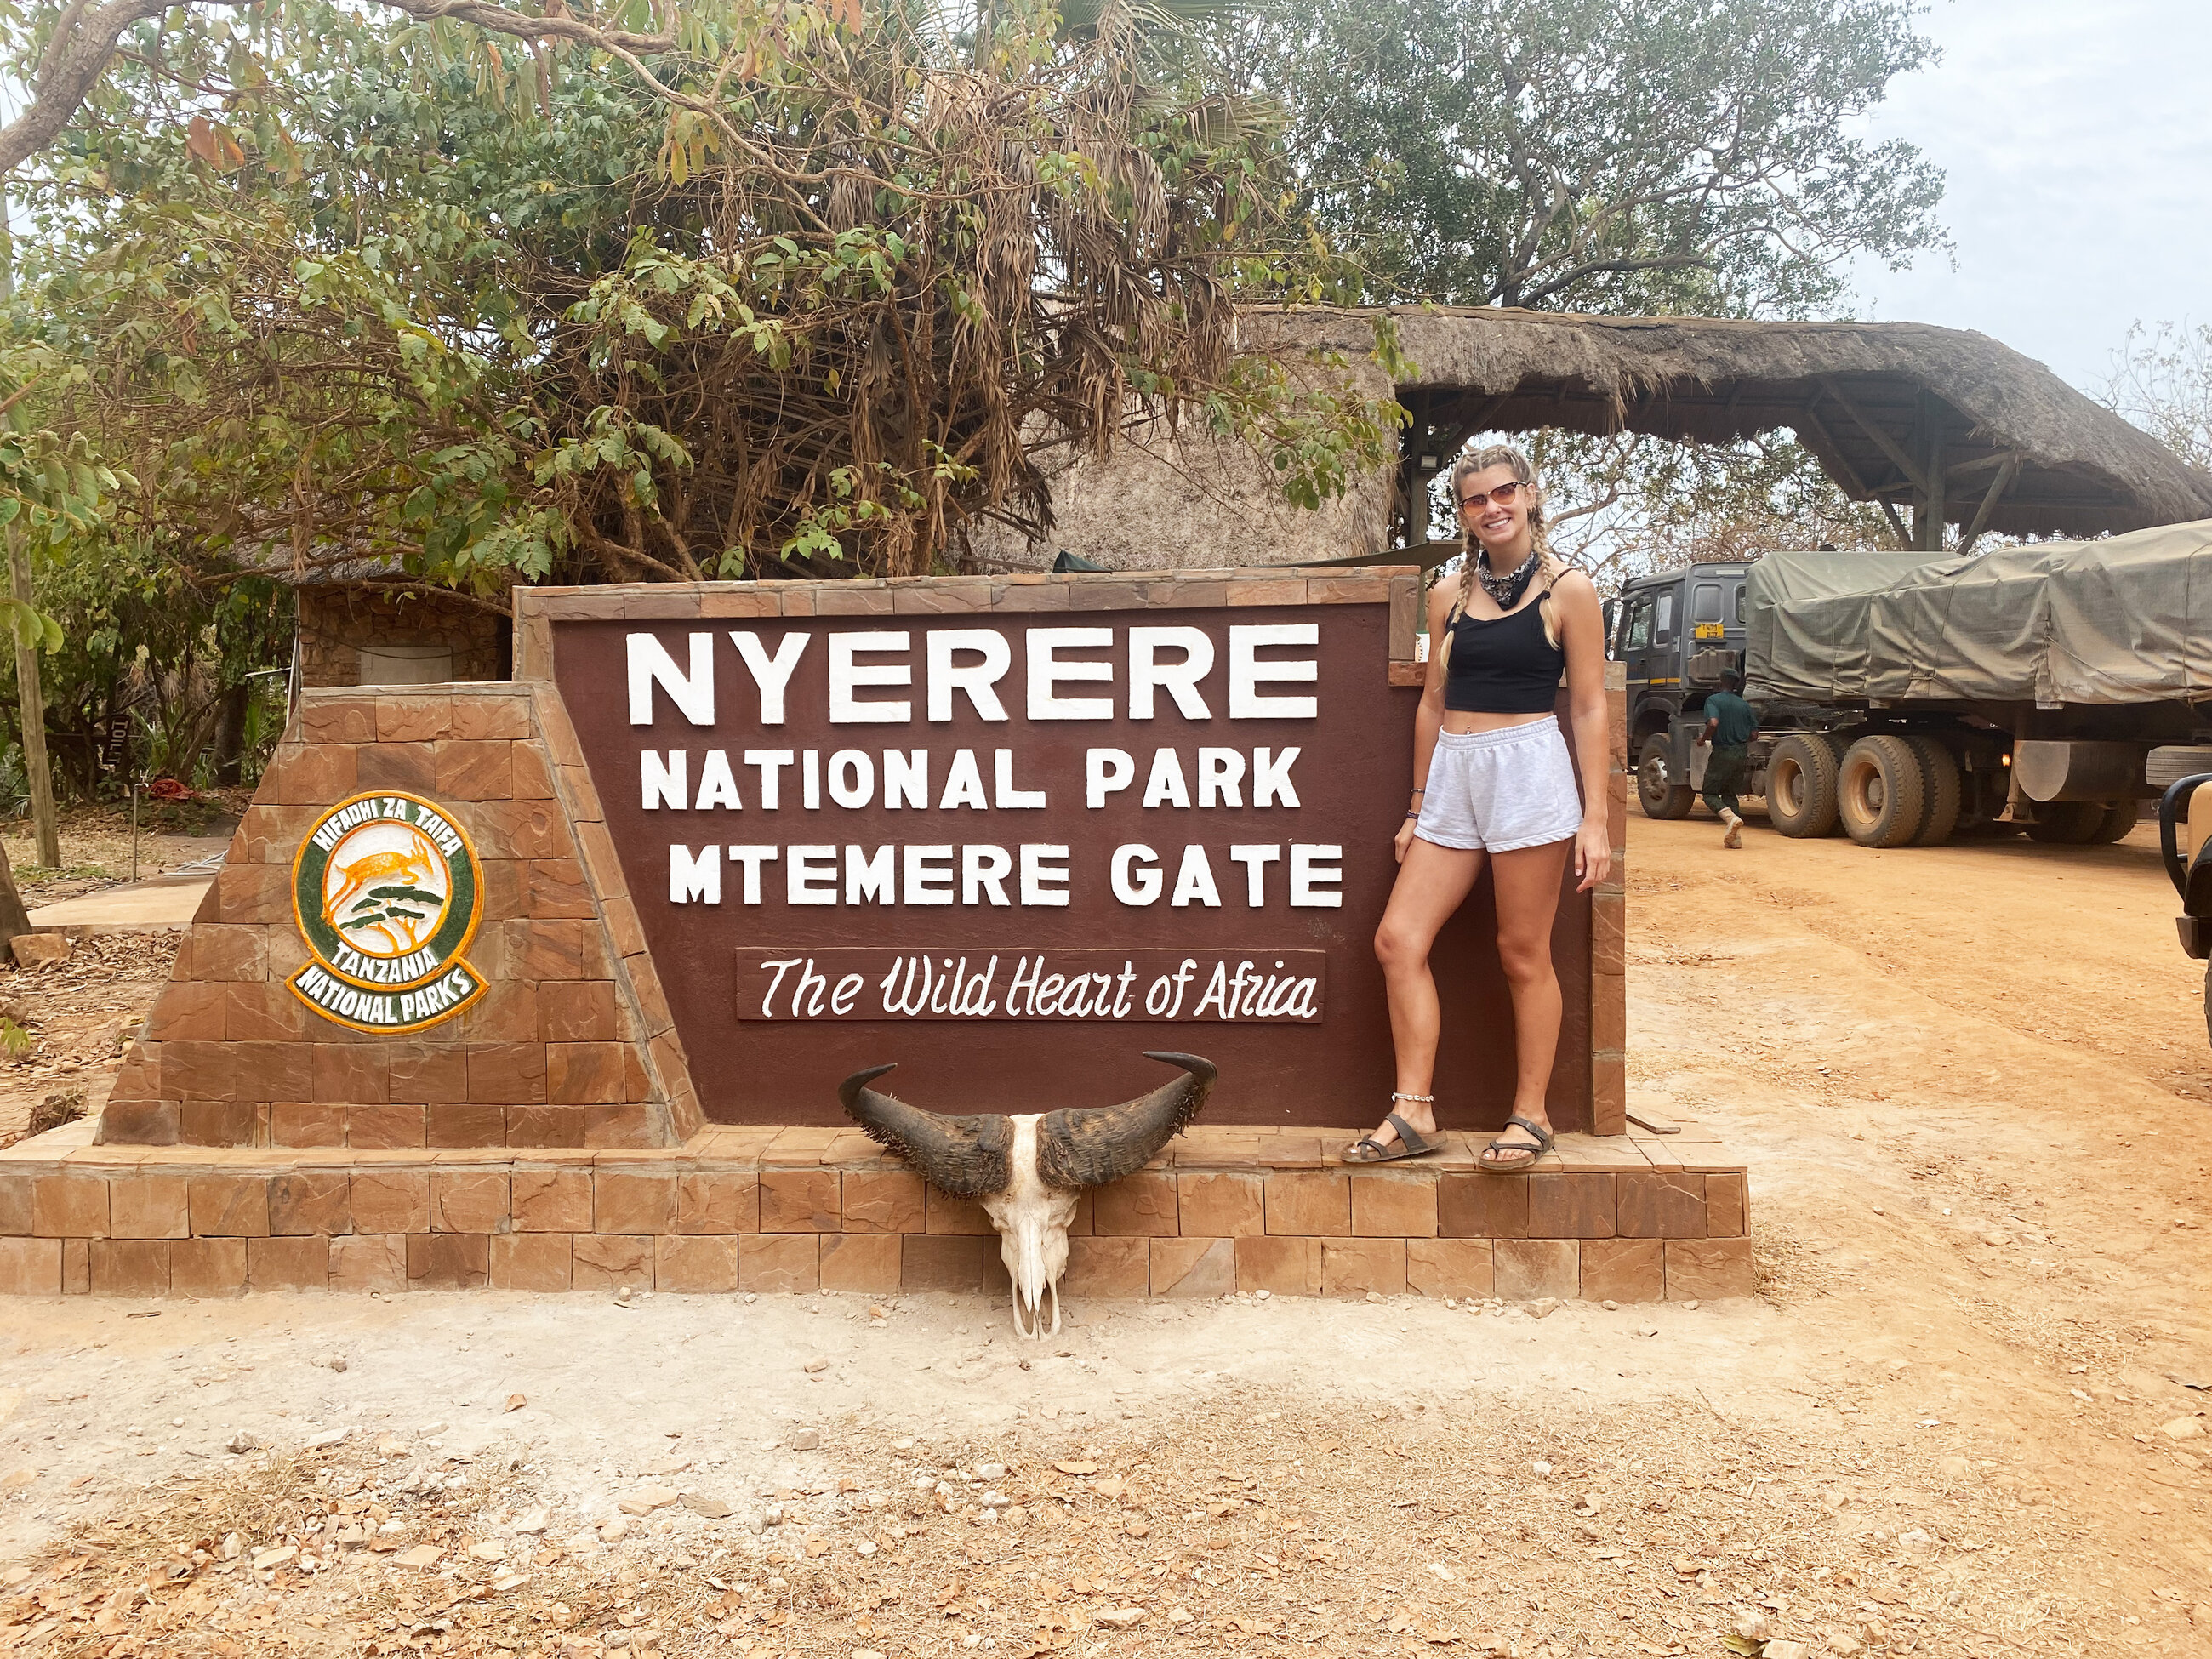 At Nyerere National Park for the safari